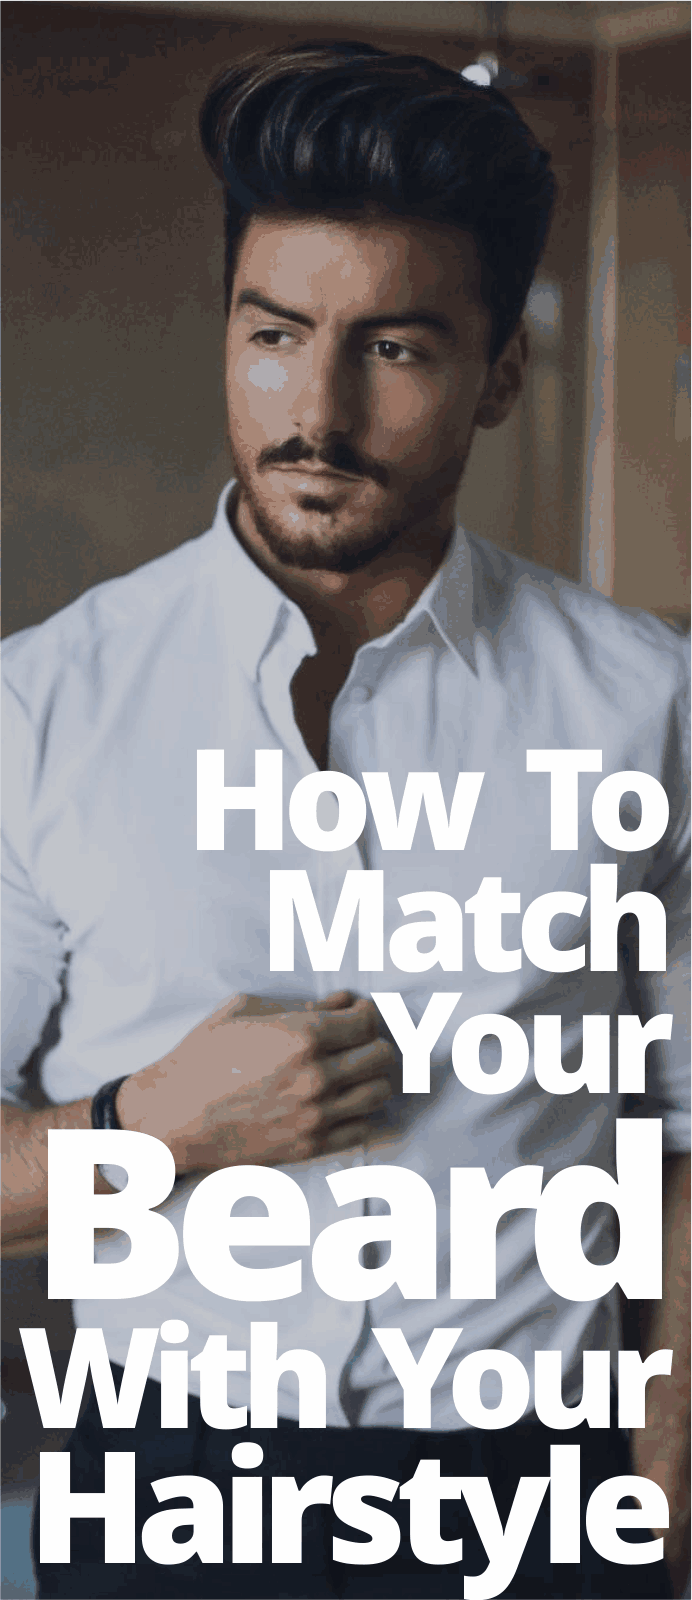 How To Match Your Beard With Your Hairstyle